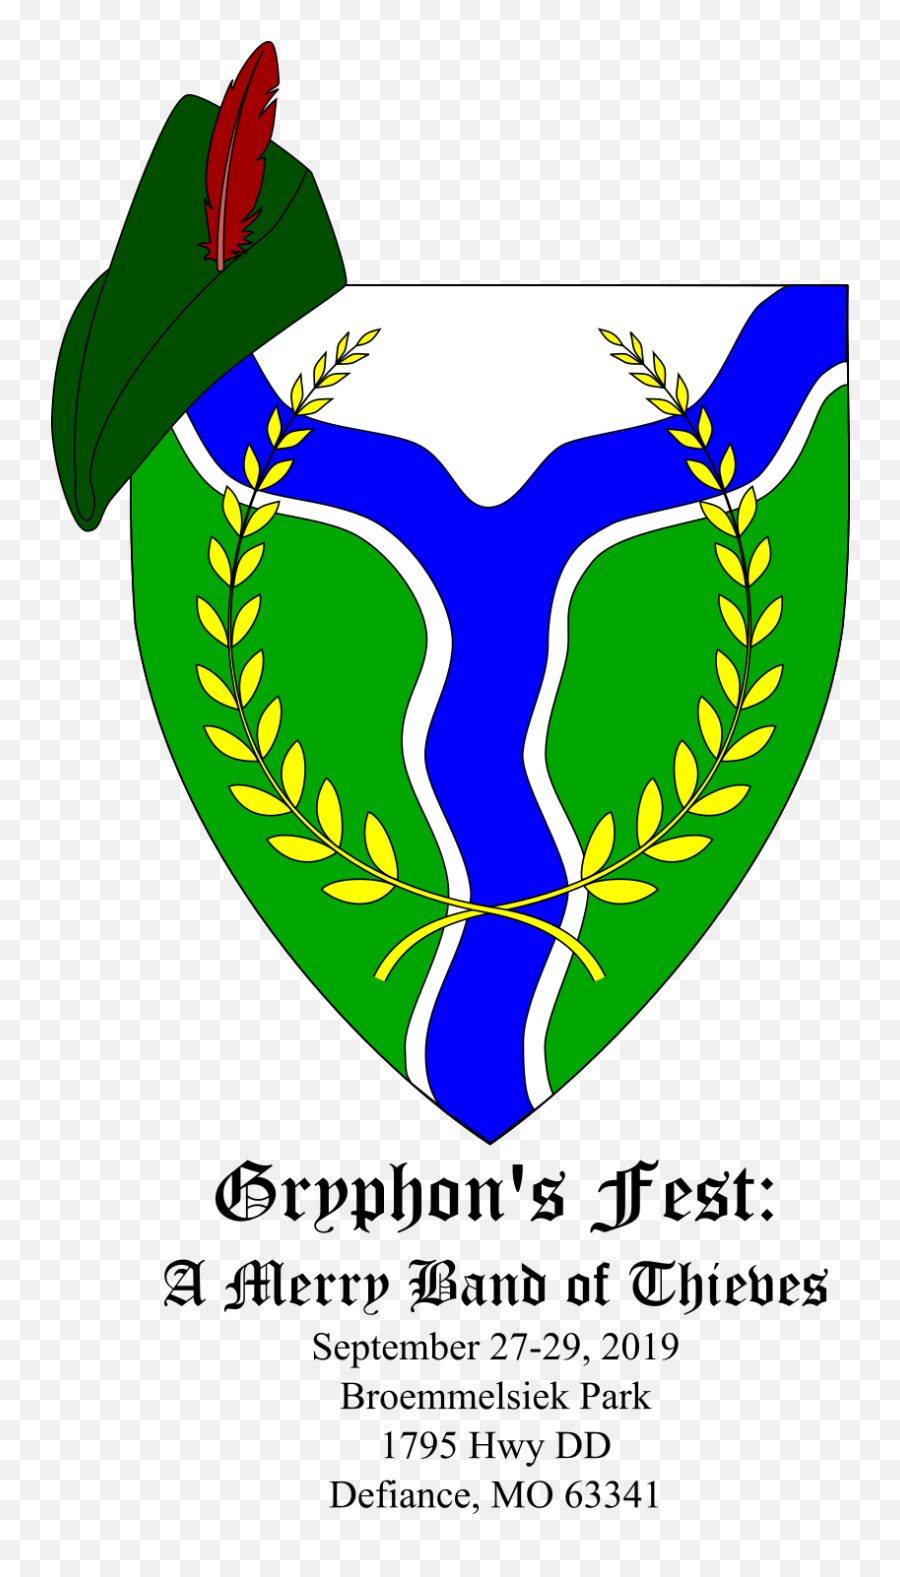 Gryphonu0027s Fest A Merry Band Of Thieves Emoji,Gryphon Logo